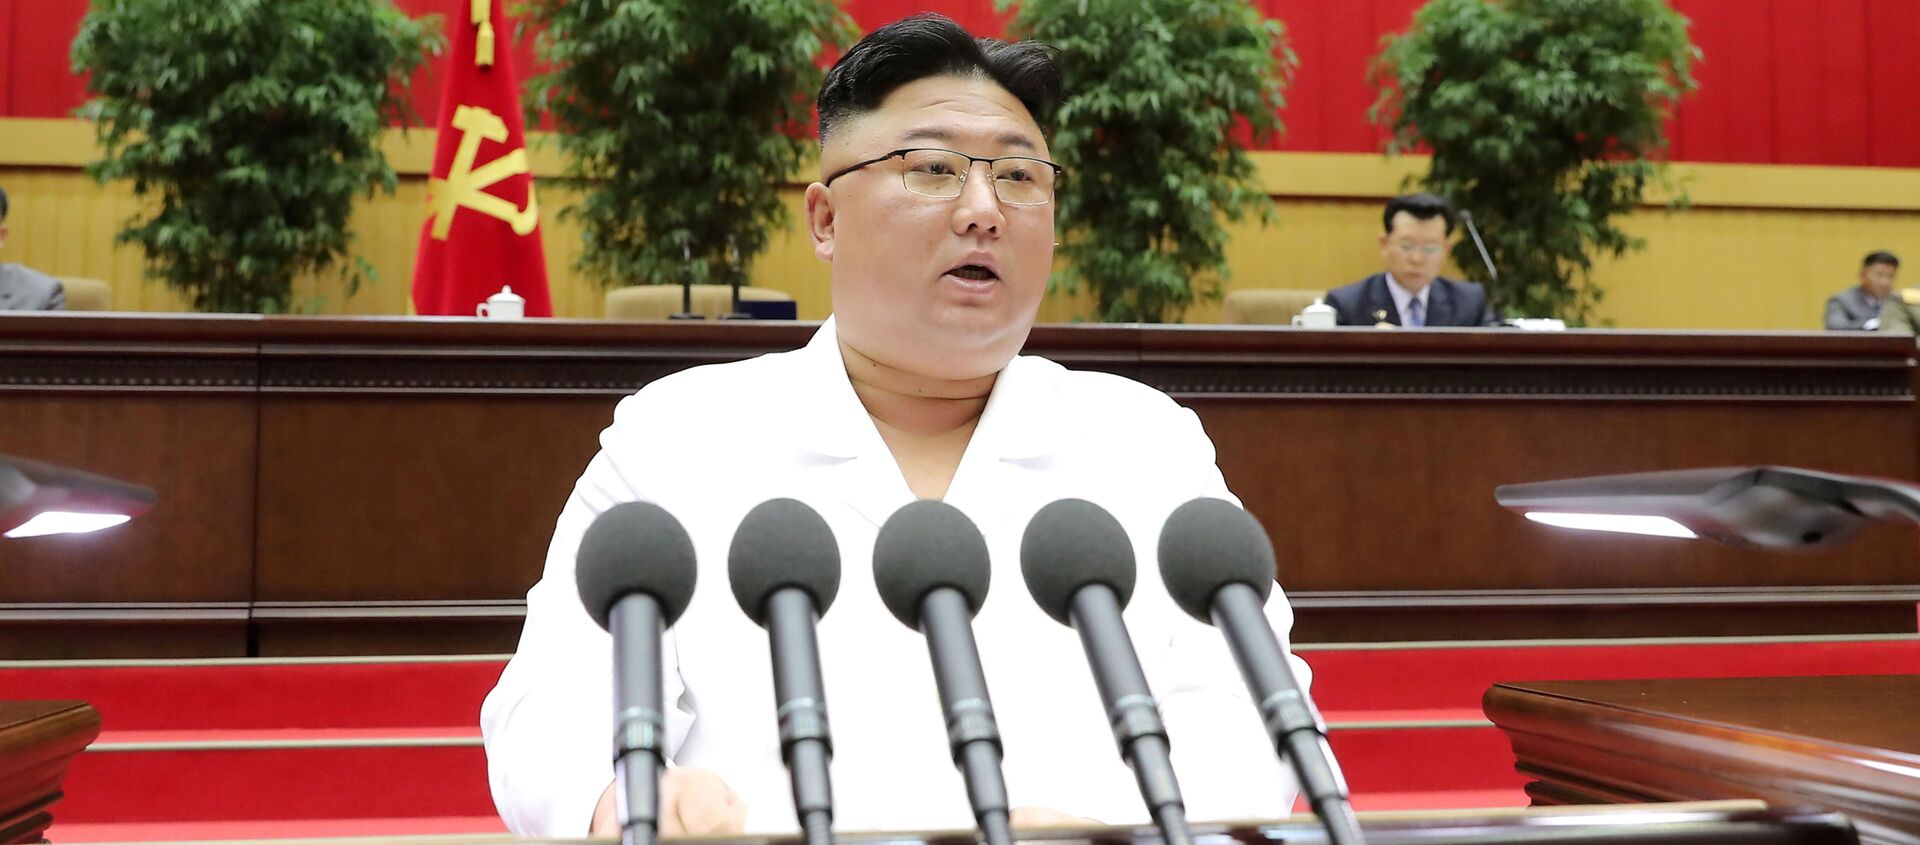 North Korean leader Kim Jong Un addresses a conference of cell secretaries of the ruling Workers' Party in Pyongyang, in this undated photo released on April 7, 2021 by North Korea's Korean Central News Agency (KCNA). - Sputnik International, 1920, 12.06.2021